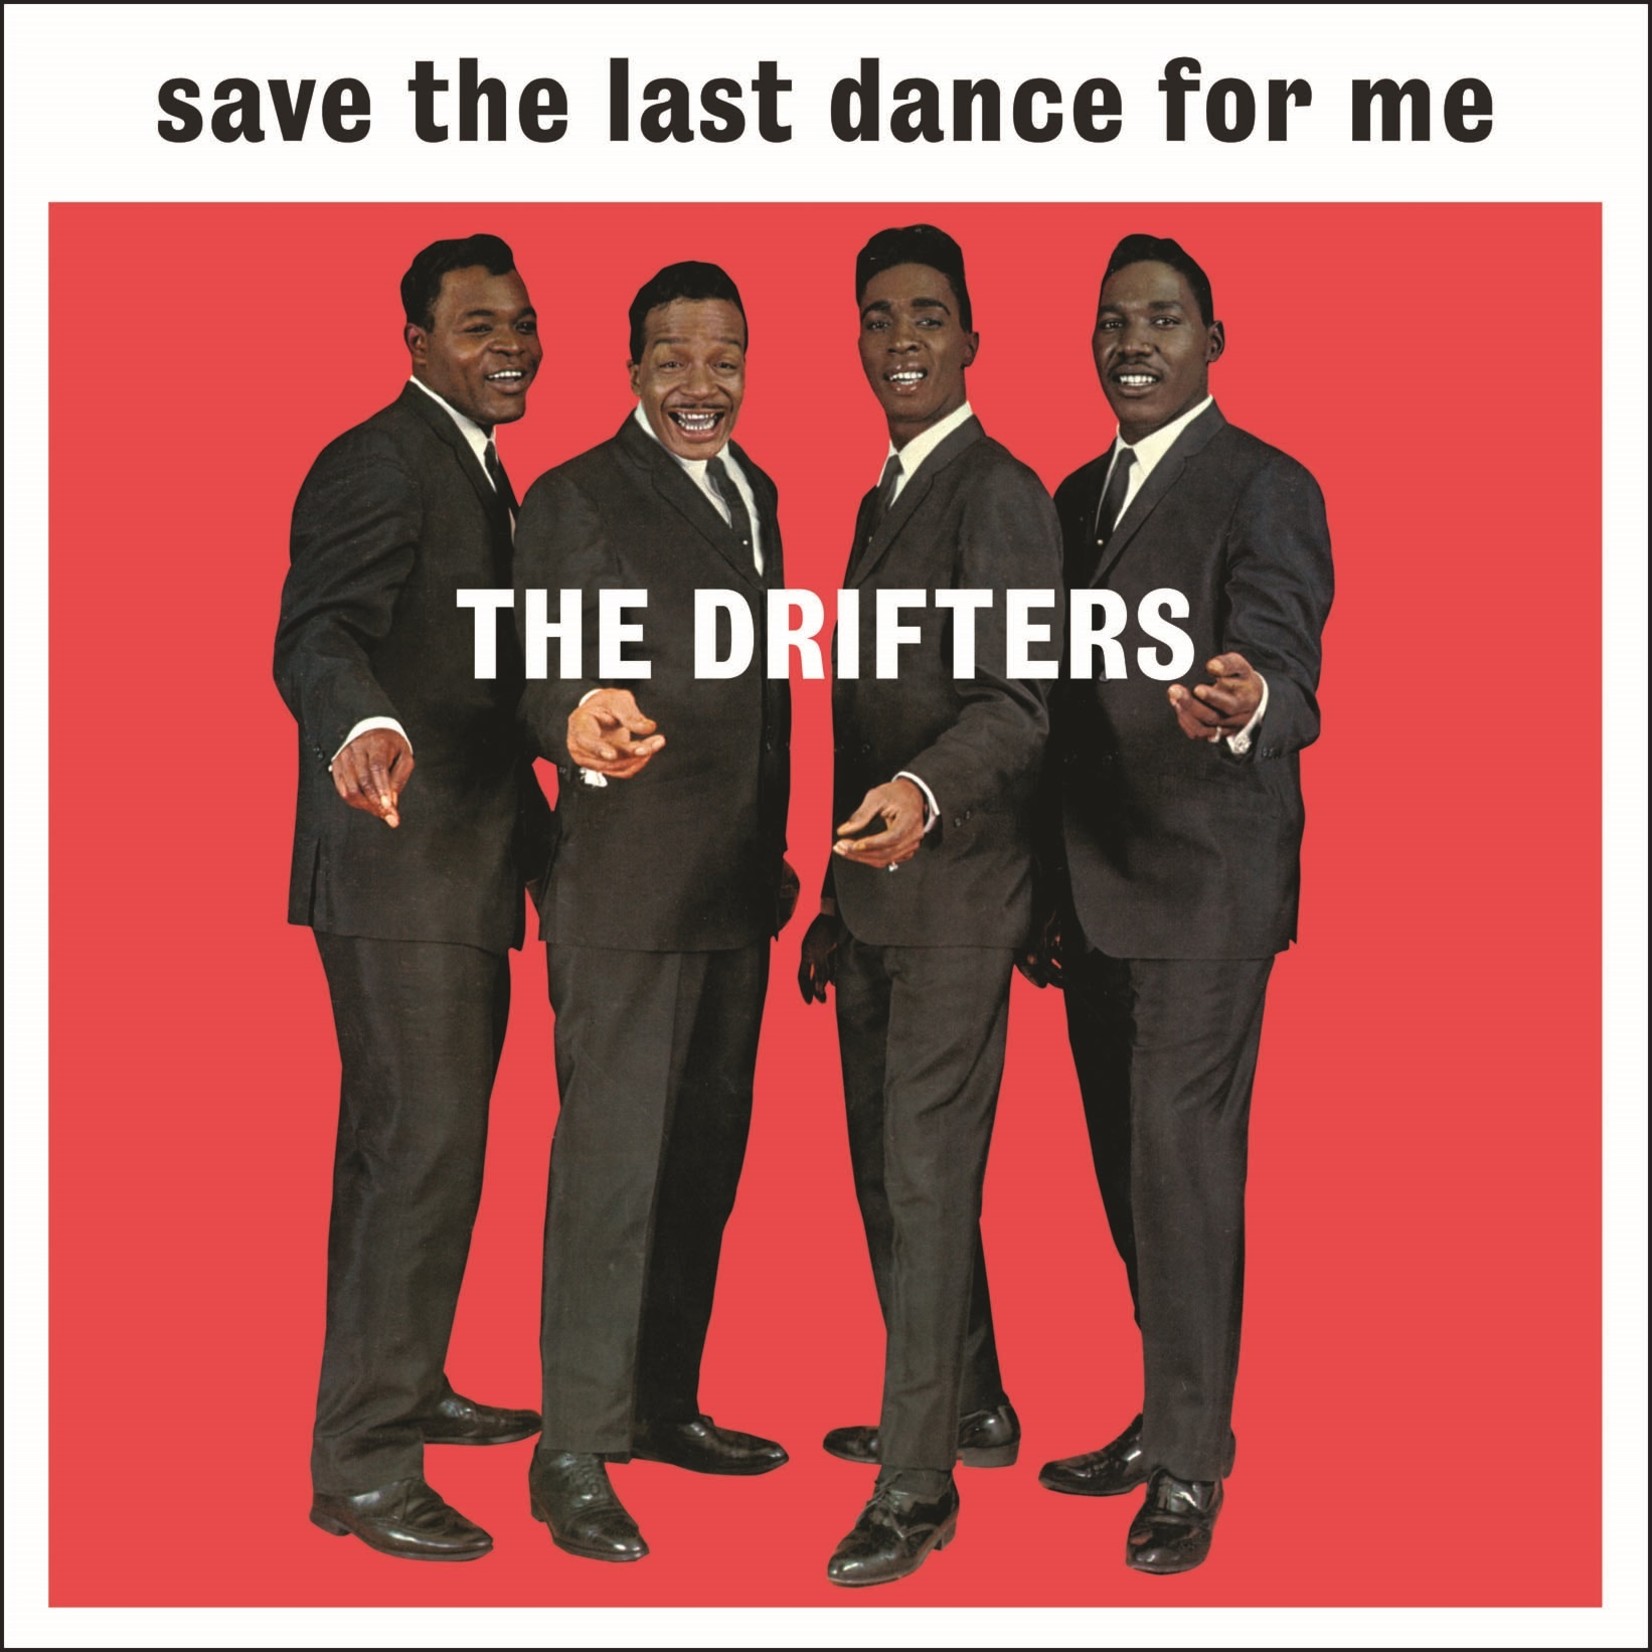 The Drifters: We Gotta Sing - The Soul Years 1962-1971, 3CD Box Set